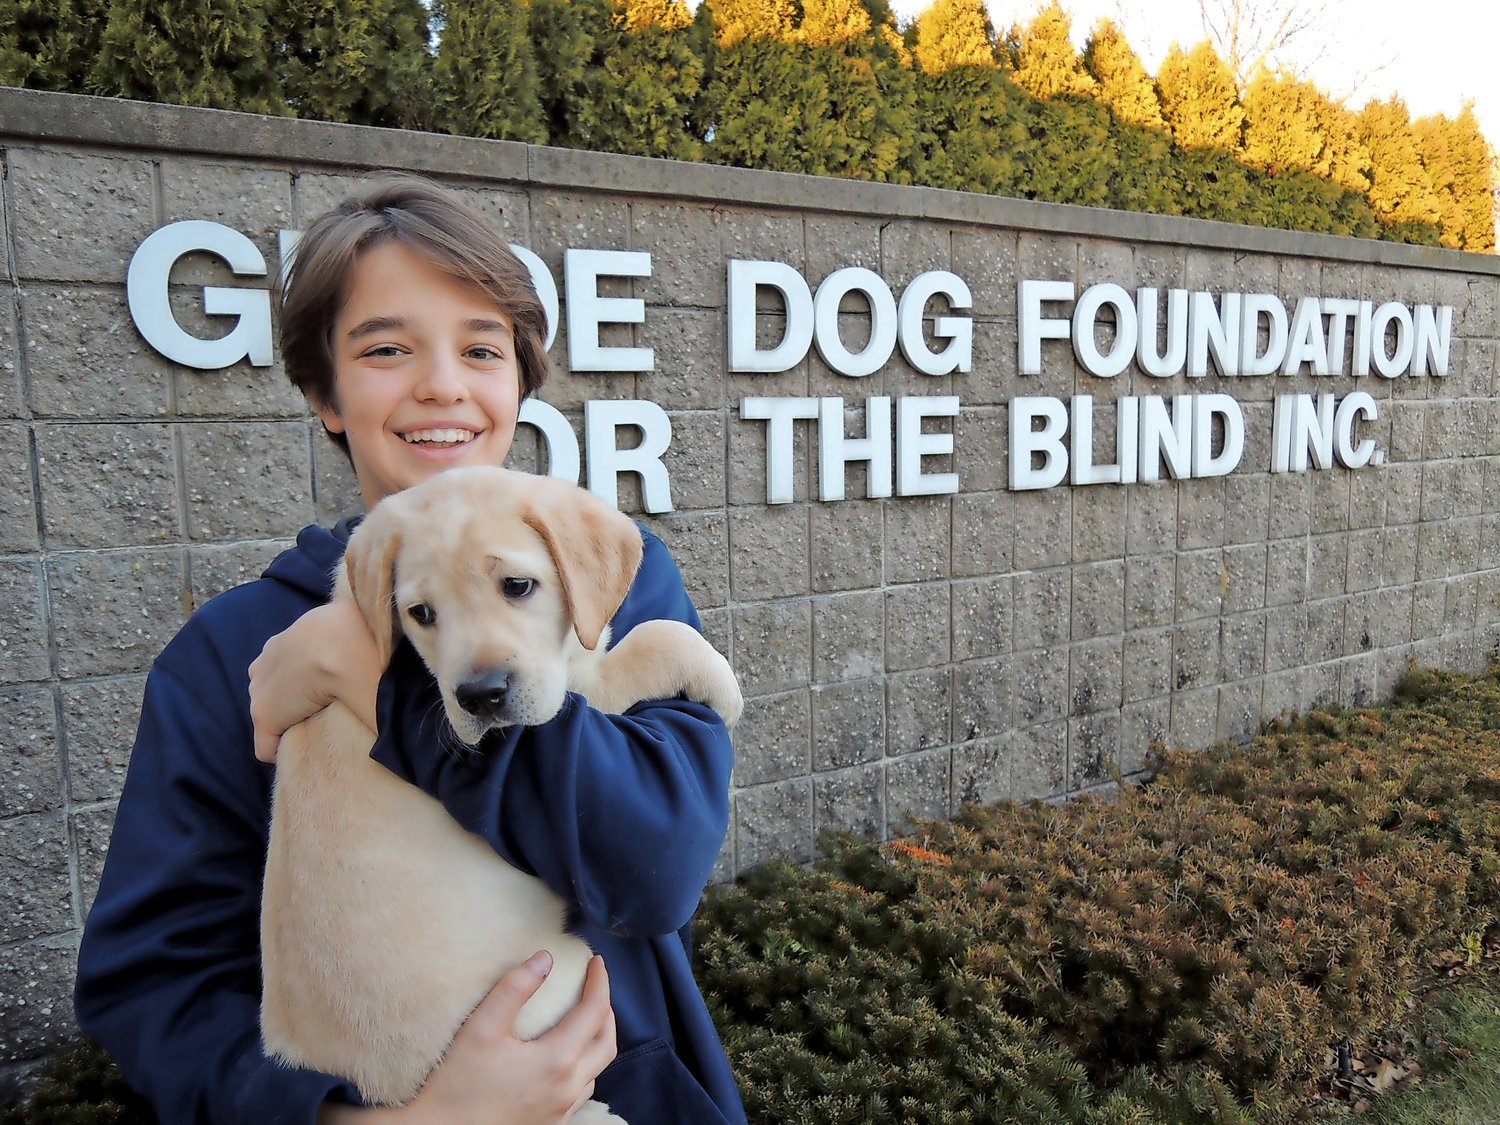 Each year, Oceanside sophomore Jeremy Feder raises thousands of dollars for America’s VetDogs, which was originally founded under the Guide Dog Foundation for the Blind, Inc.